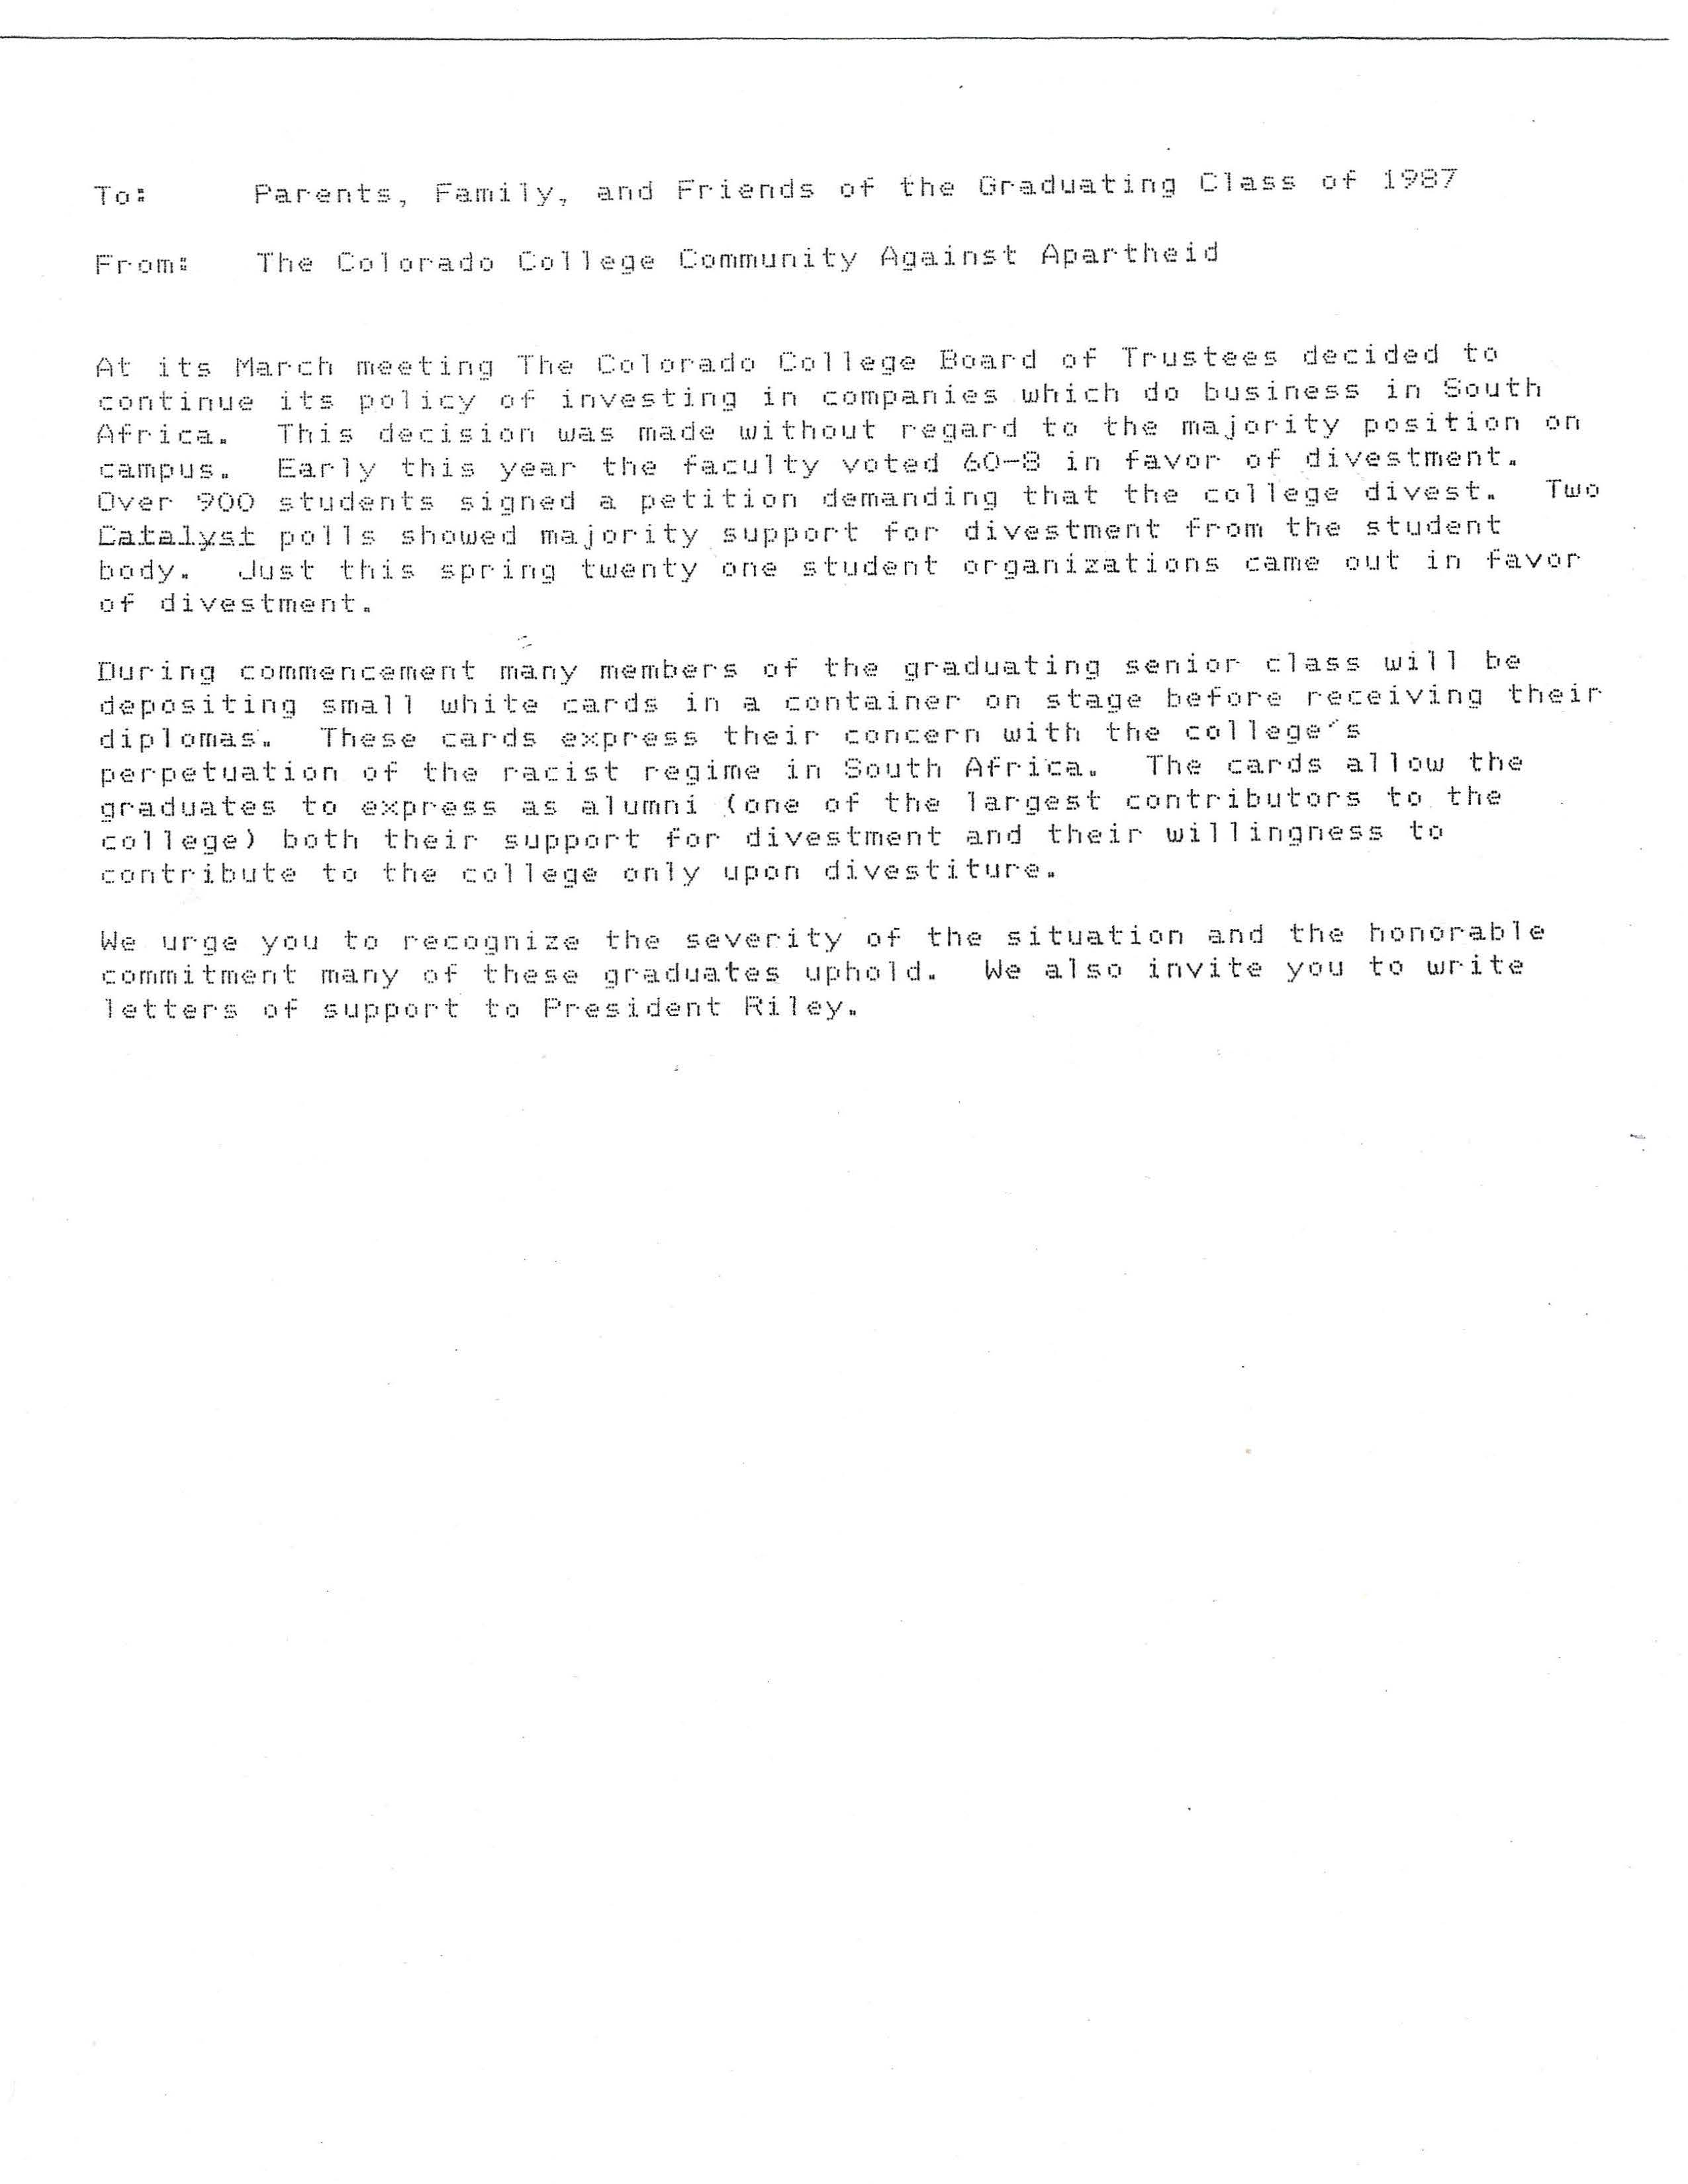 Page 1 of the Memorandum, To: Parents, Family, and Friends of the Graduating Class of 1987